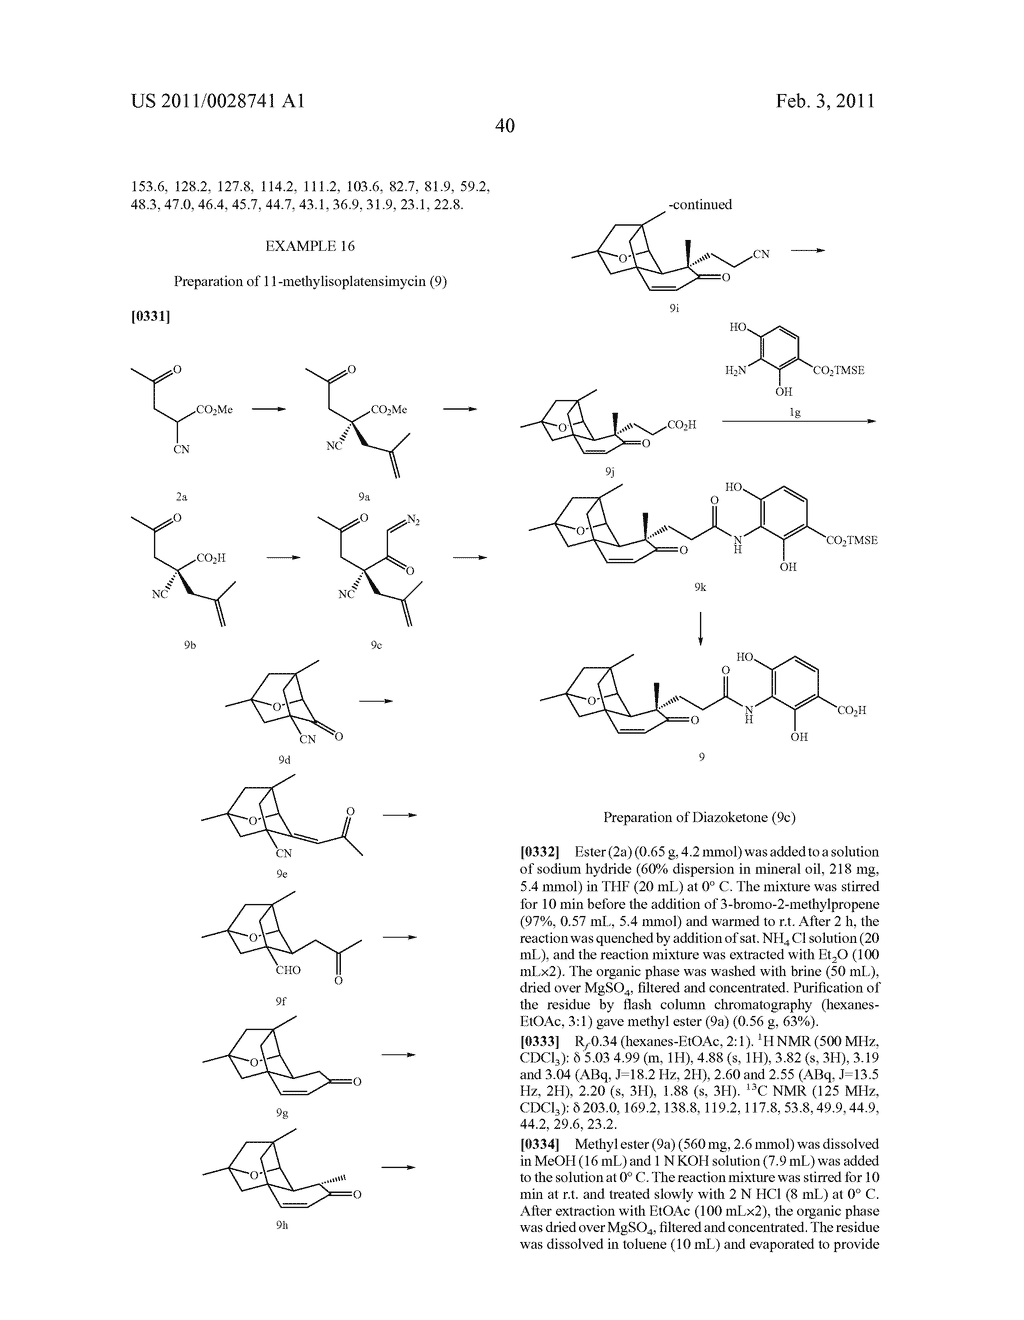 Novel Platensimycin Derivatives, Their Intermediates, and Process for Preparing the Same, and New Process for Preparing Platensimycin - diagram, schematic, and image 41